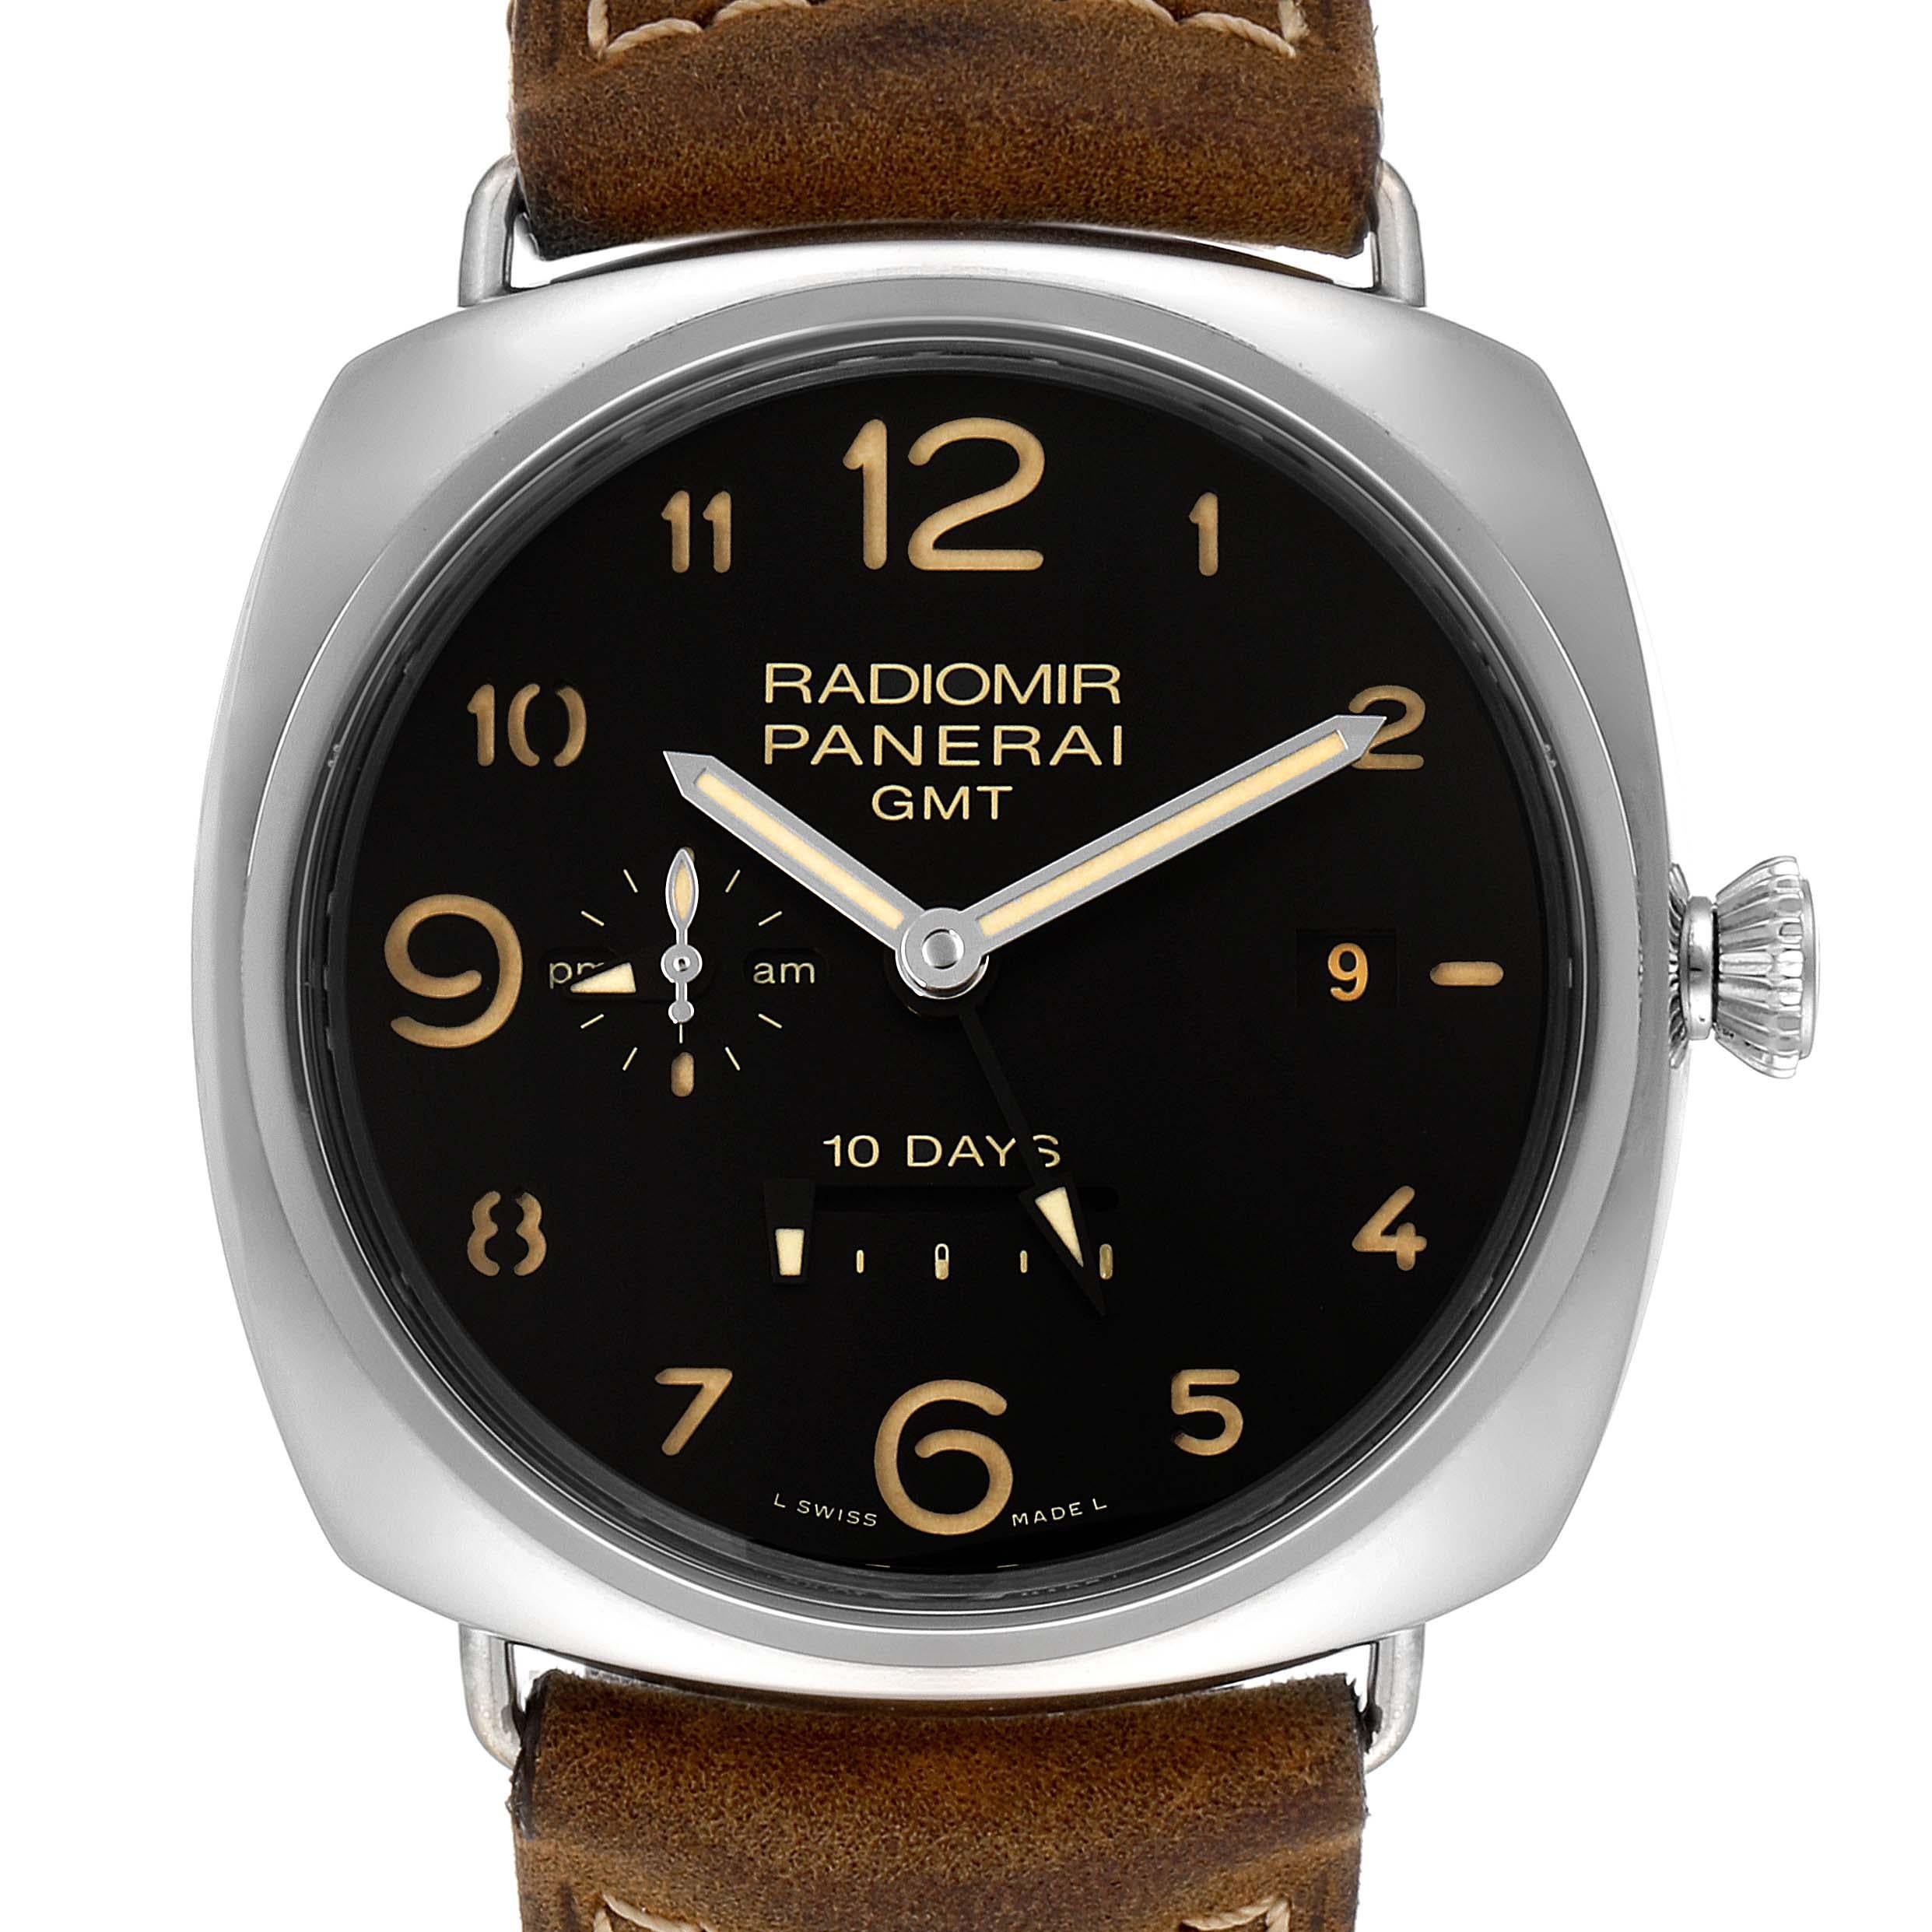 Panerai Radiomir Acciaio 47mm 10 Days GMT Steel Watch PAM00473 Box Papers. Automatic self-winding movement. Two part cushion shaped stainless steel case 47.0 mm in diameter. Polished stainless steel sloped bezel. Scratch resistant sapphire crystal.